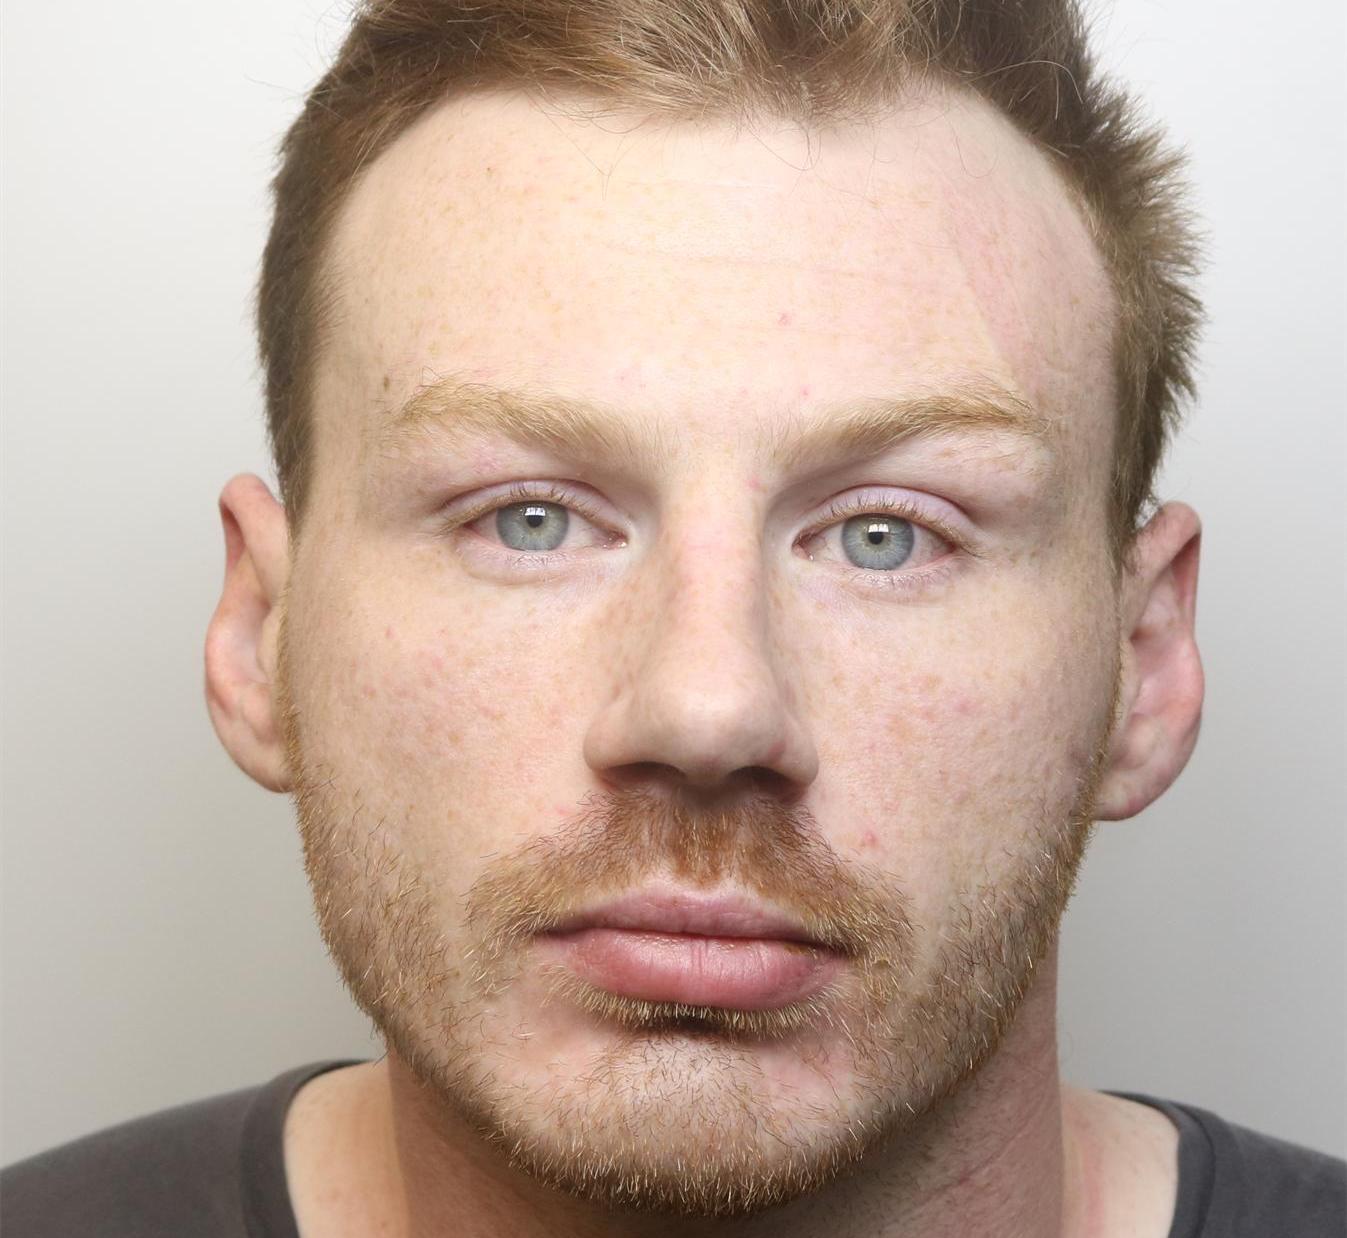 Daniel Boulton, who police said they urgently wanted to trace